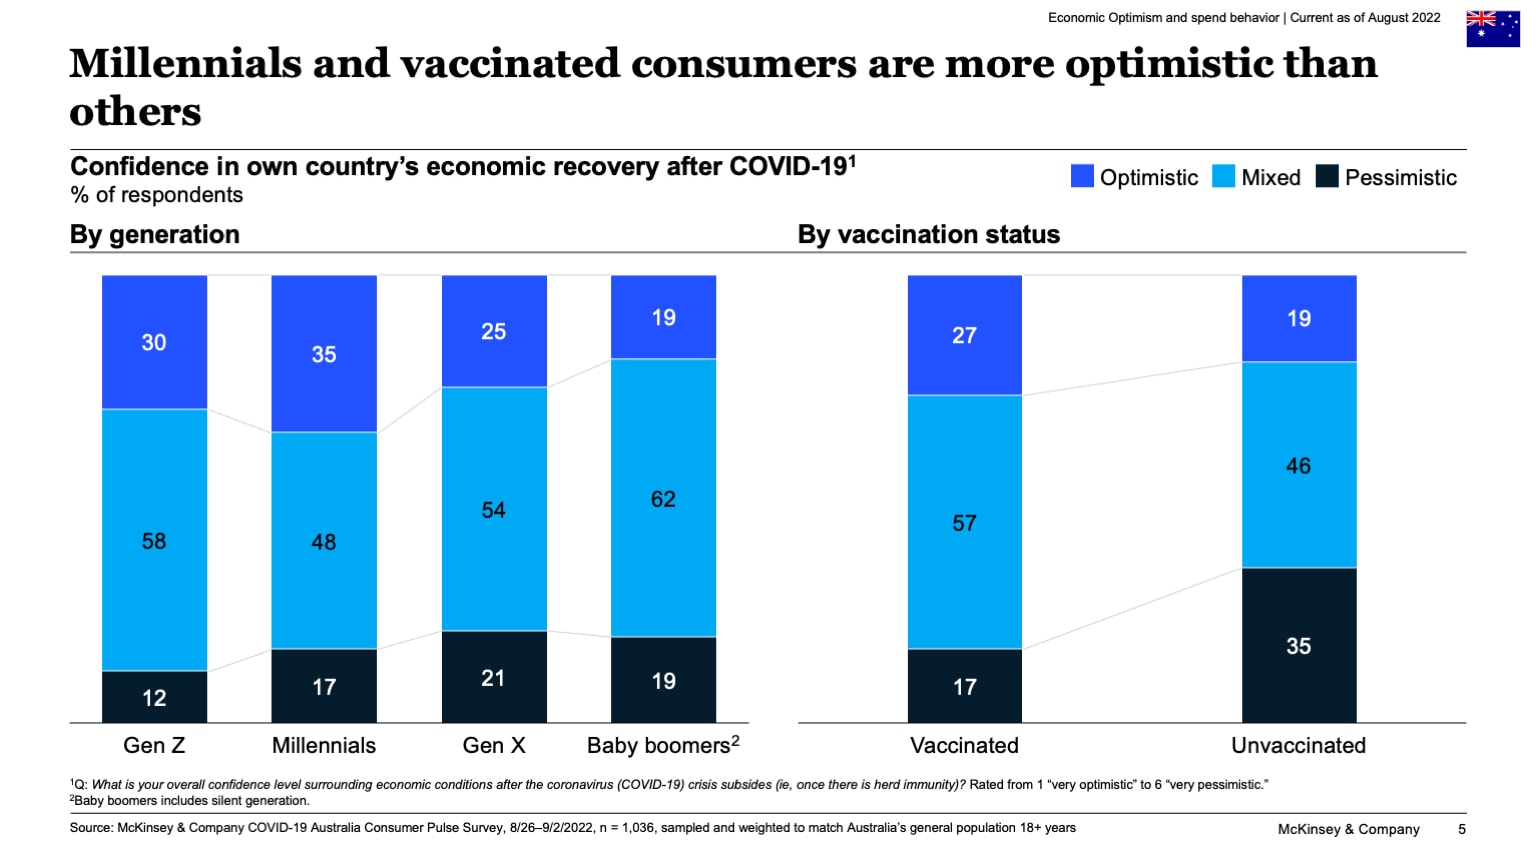 Millennials and vaccinated consumers are more optimistic than others